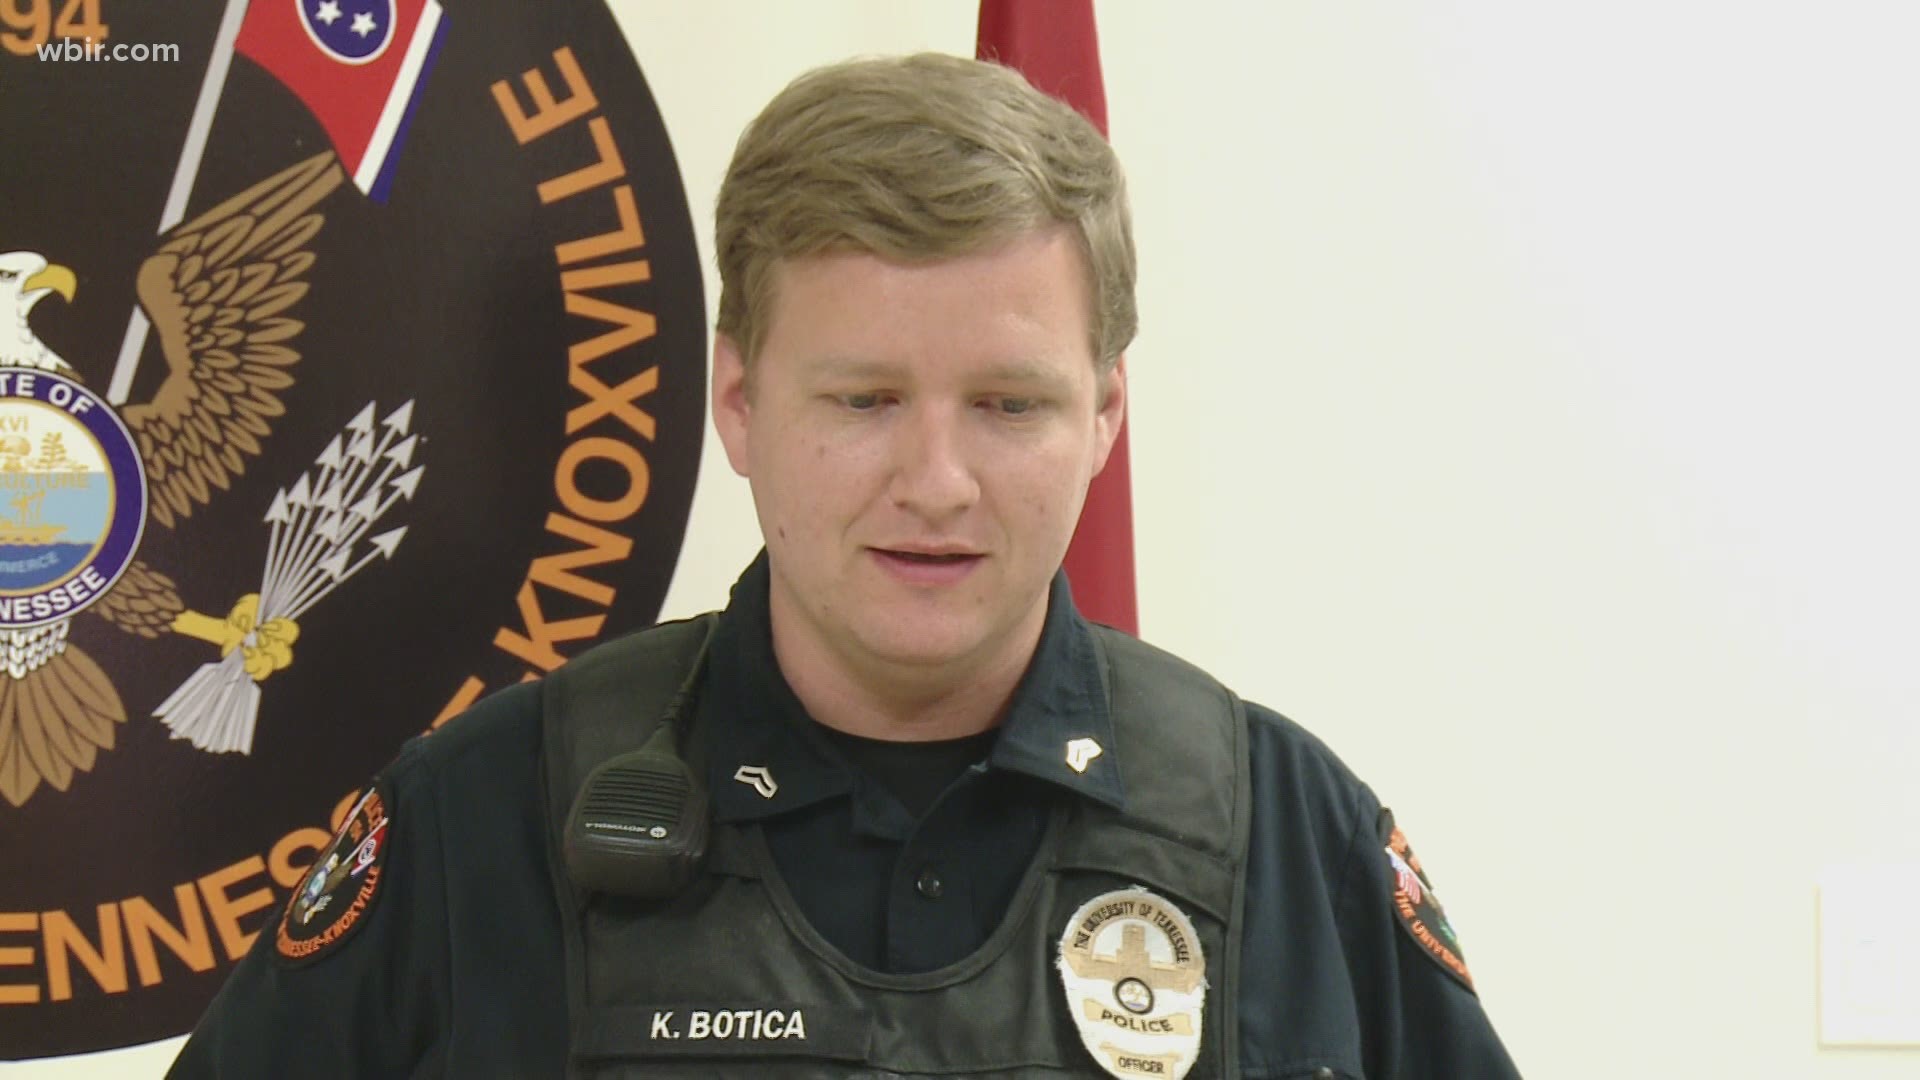 The UT police officer credited with saving a man after a vehicle fire on I-40 says he's in this line of work to do the right thing.